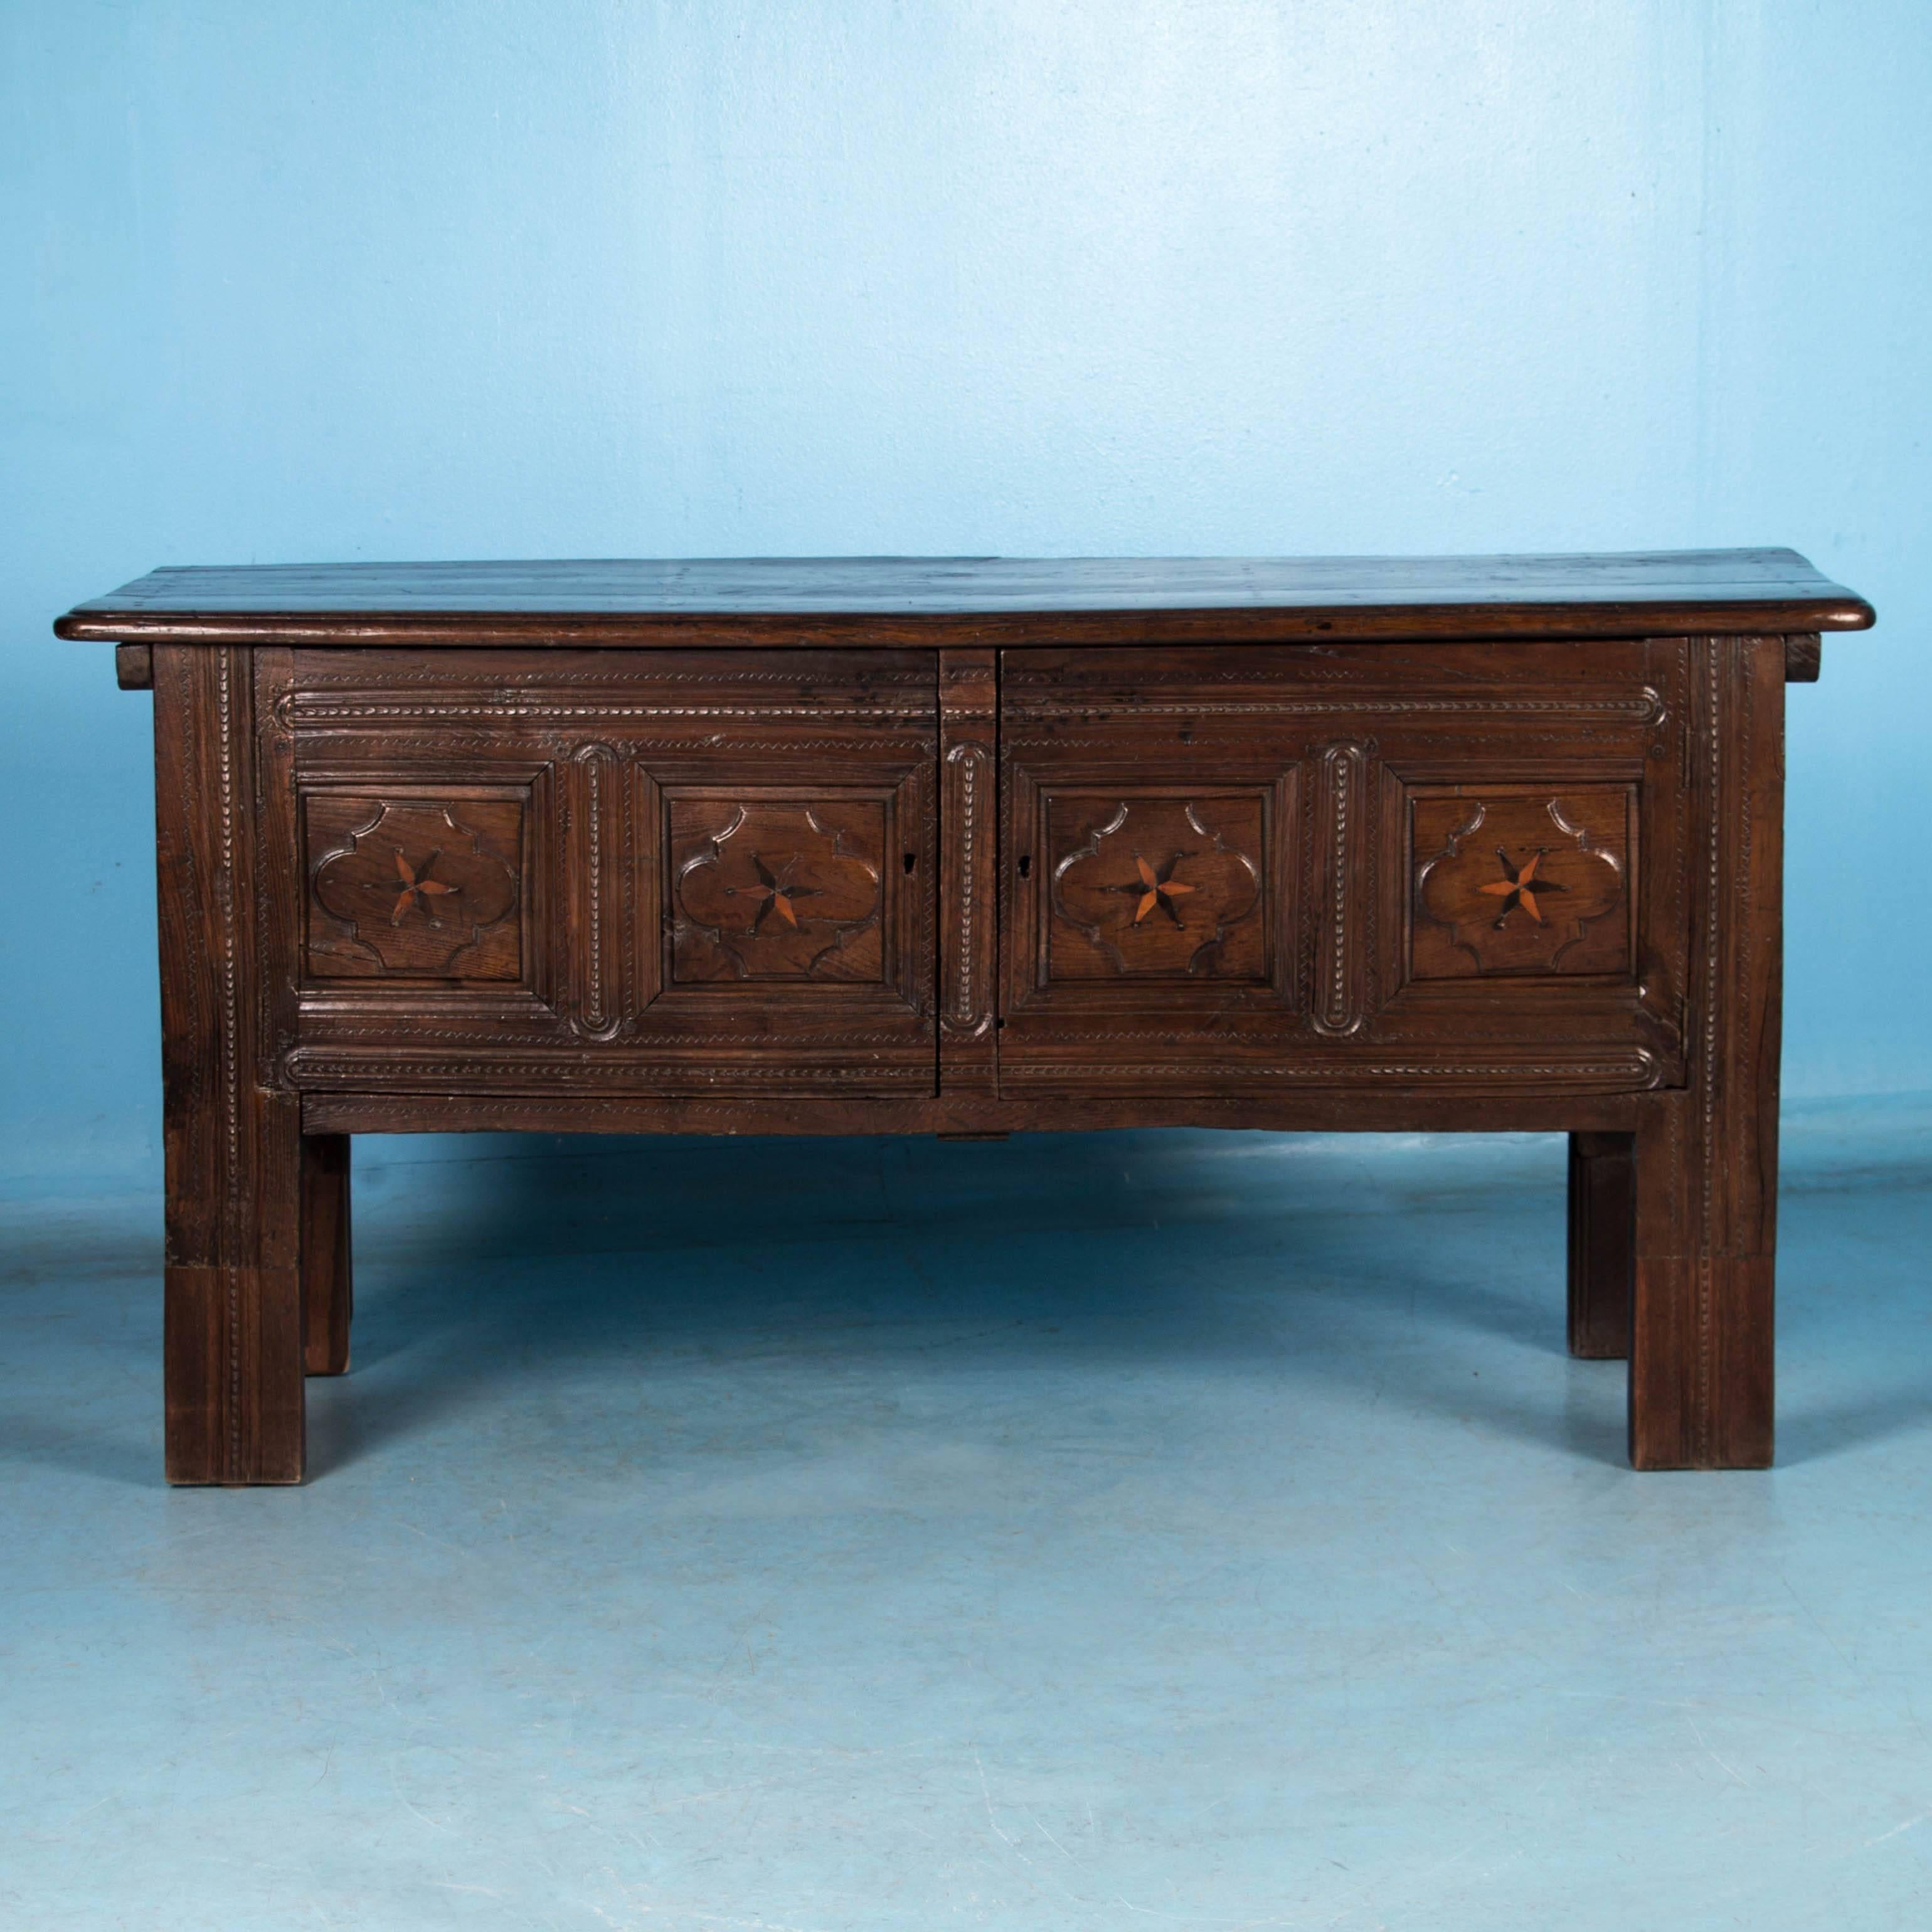 The raised panels with inlay of contrasting wood and the rich brown oak color add to the appeal of this late 19th century Georgian cabinet. Originally lower to the ground, about 8 inches has been added to the legs to achieve the height of a server